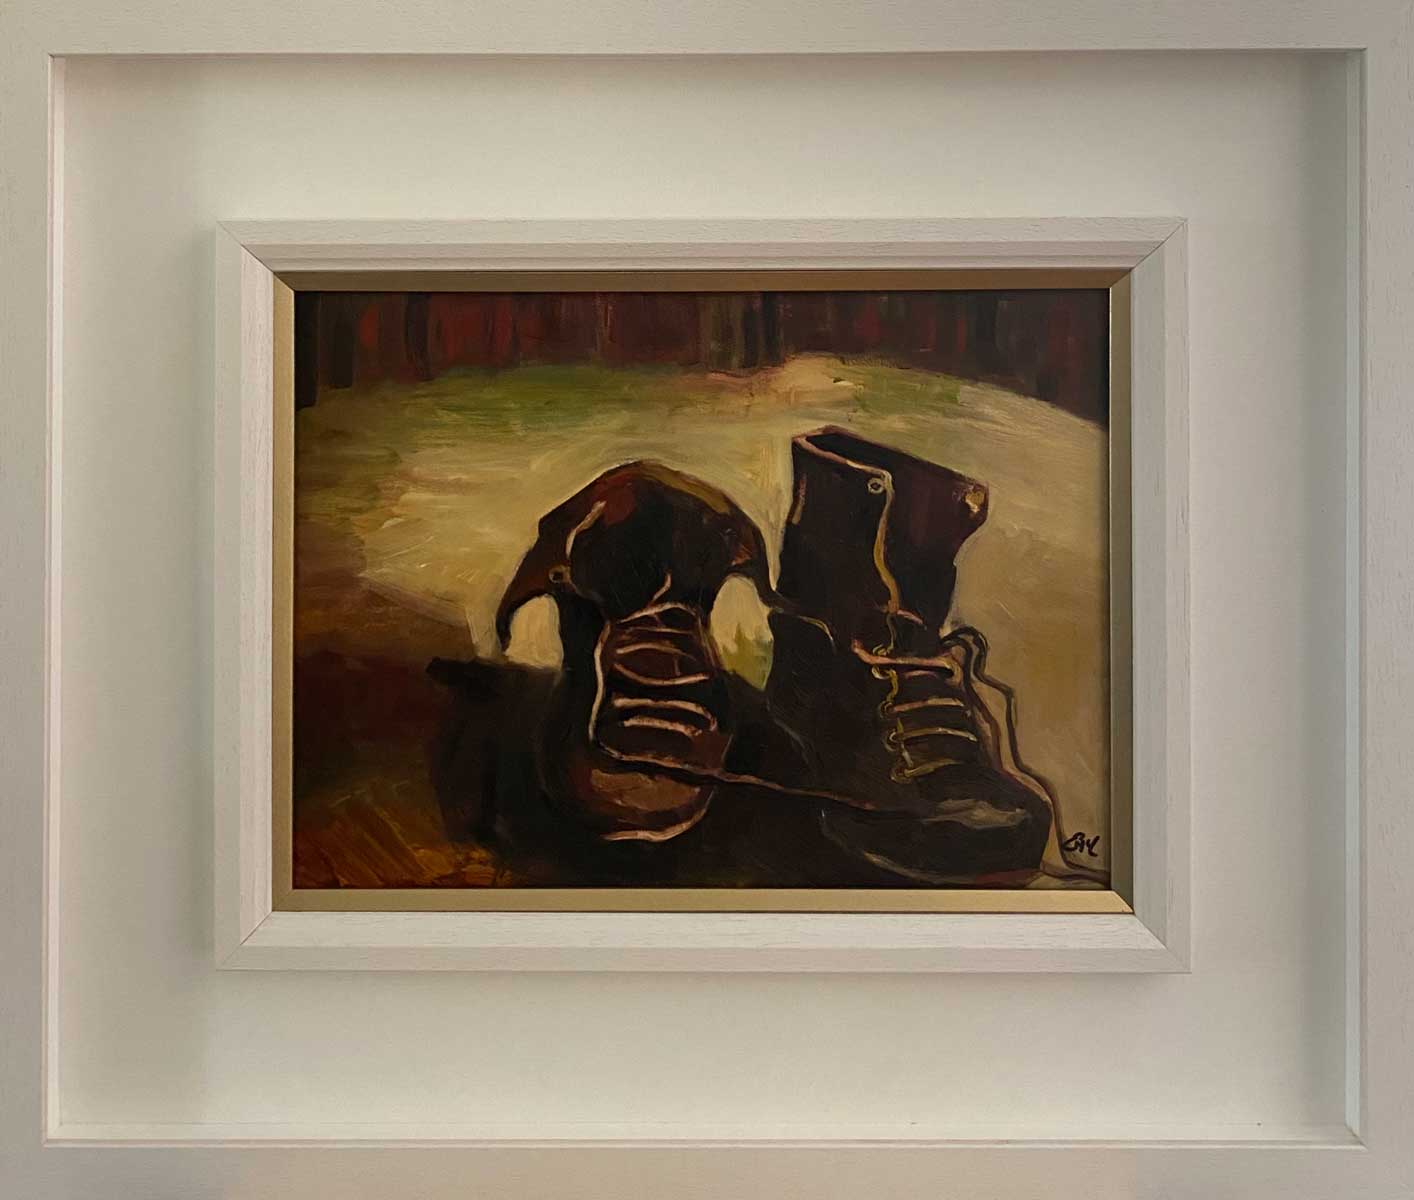 AH THE OLD BOOTS - after Van Gogh